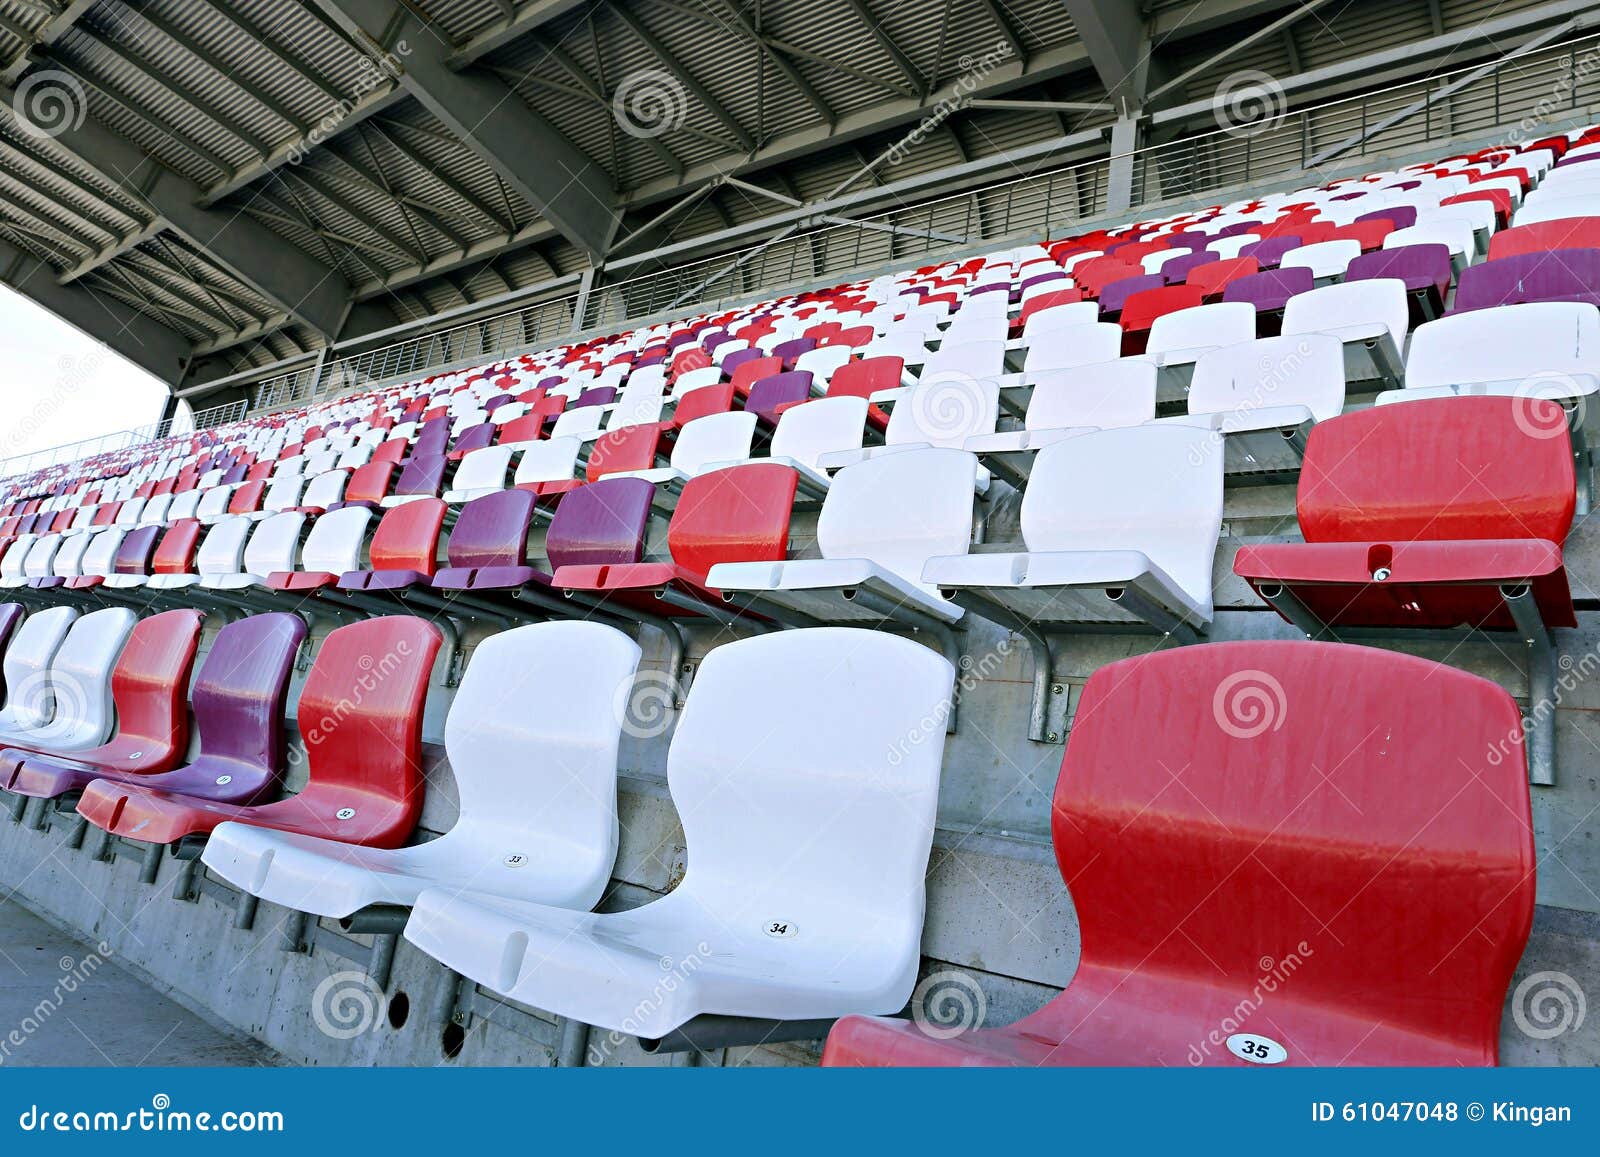 Multicolored Chairs on the Stadium Stock Photo - Image of stools, ranks ...